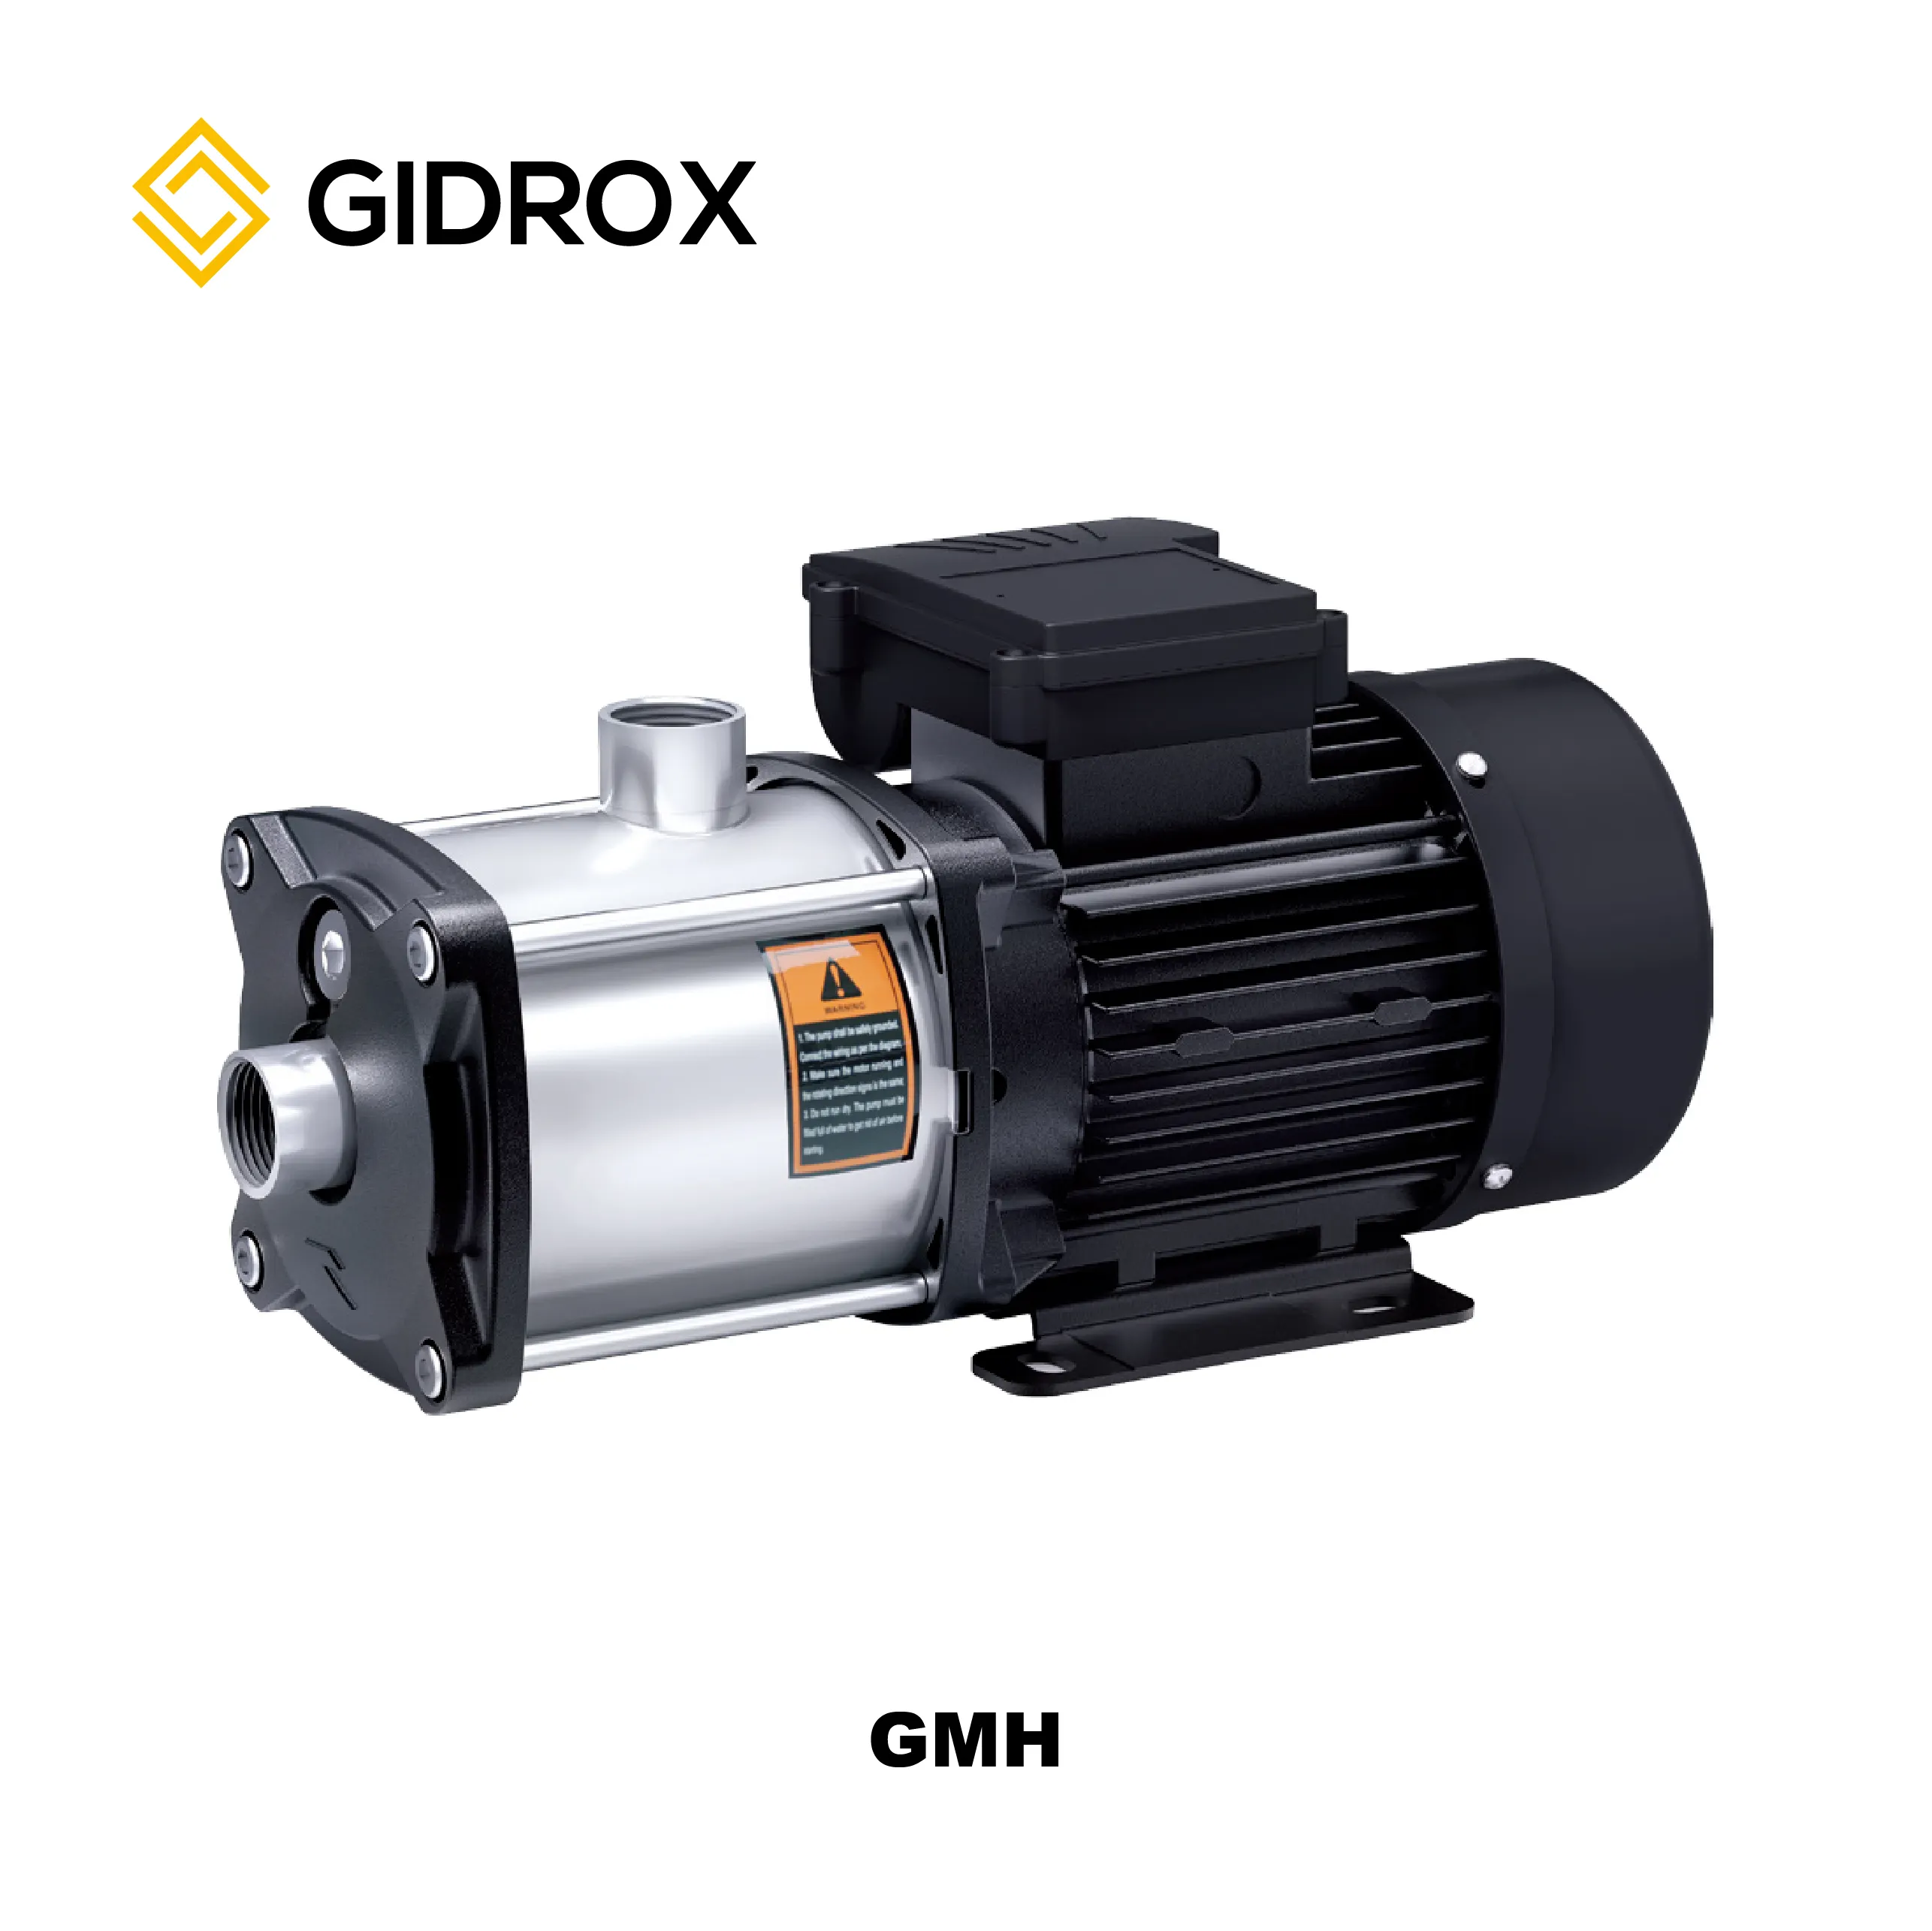 GIDROX Stainless Steel Impeller Light Horizontal Multistage Centrifugal Pumps For Industry And Water Boosting